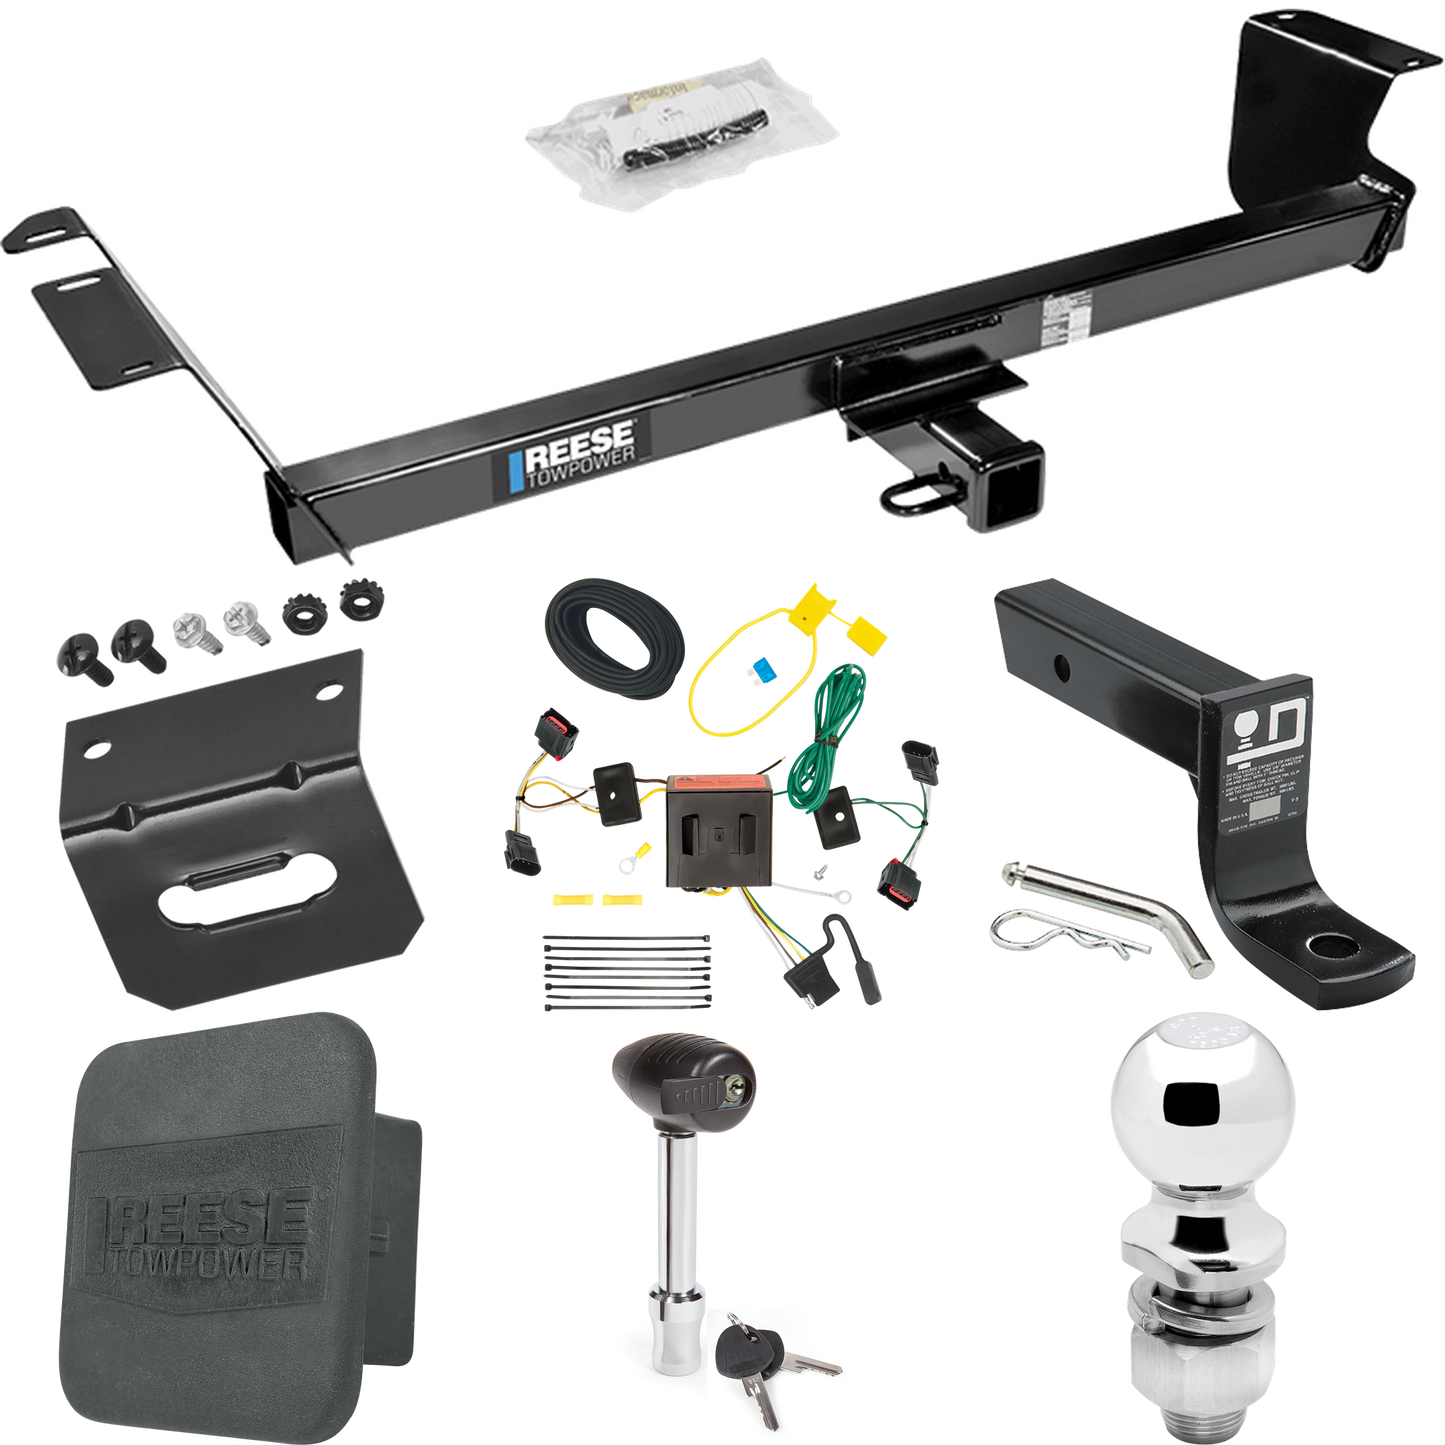 Fits 2008-2010 Chrysler Town & Country Trailer Hitch Tow PKG w/ 4-Flat Wiring + Ball Mount w/ 4" Drop + 2" Ball + Wiring Bracket + Hitch Lock + Hitch Cover By Reese Towpower